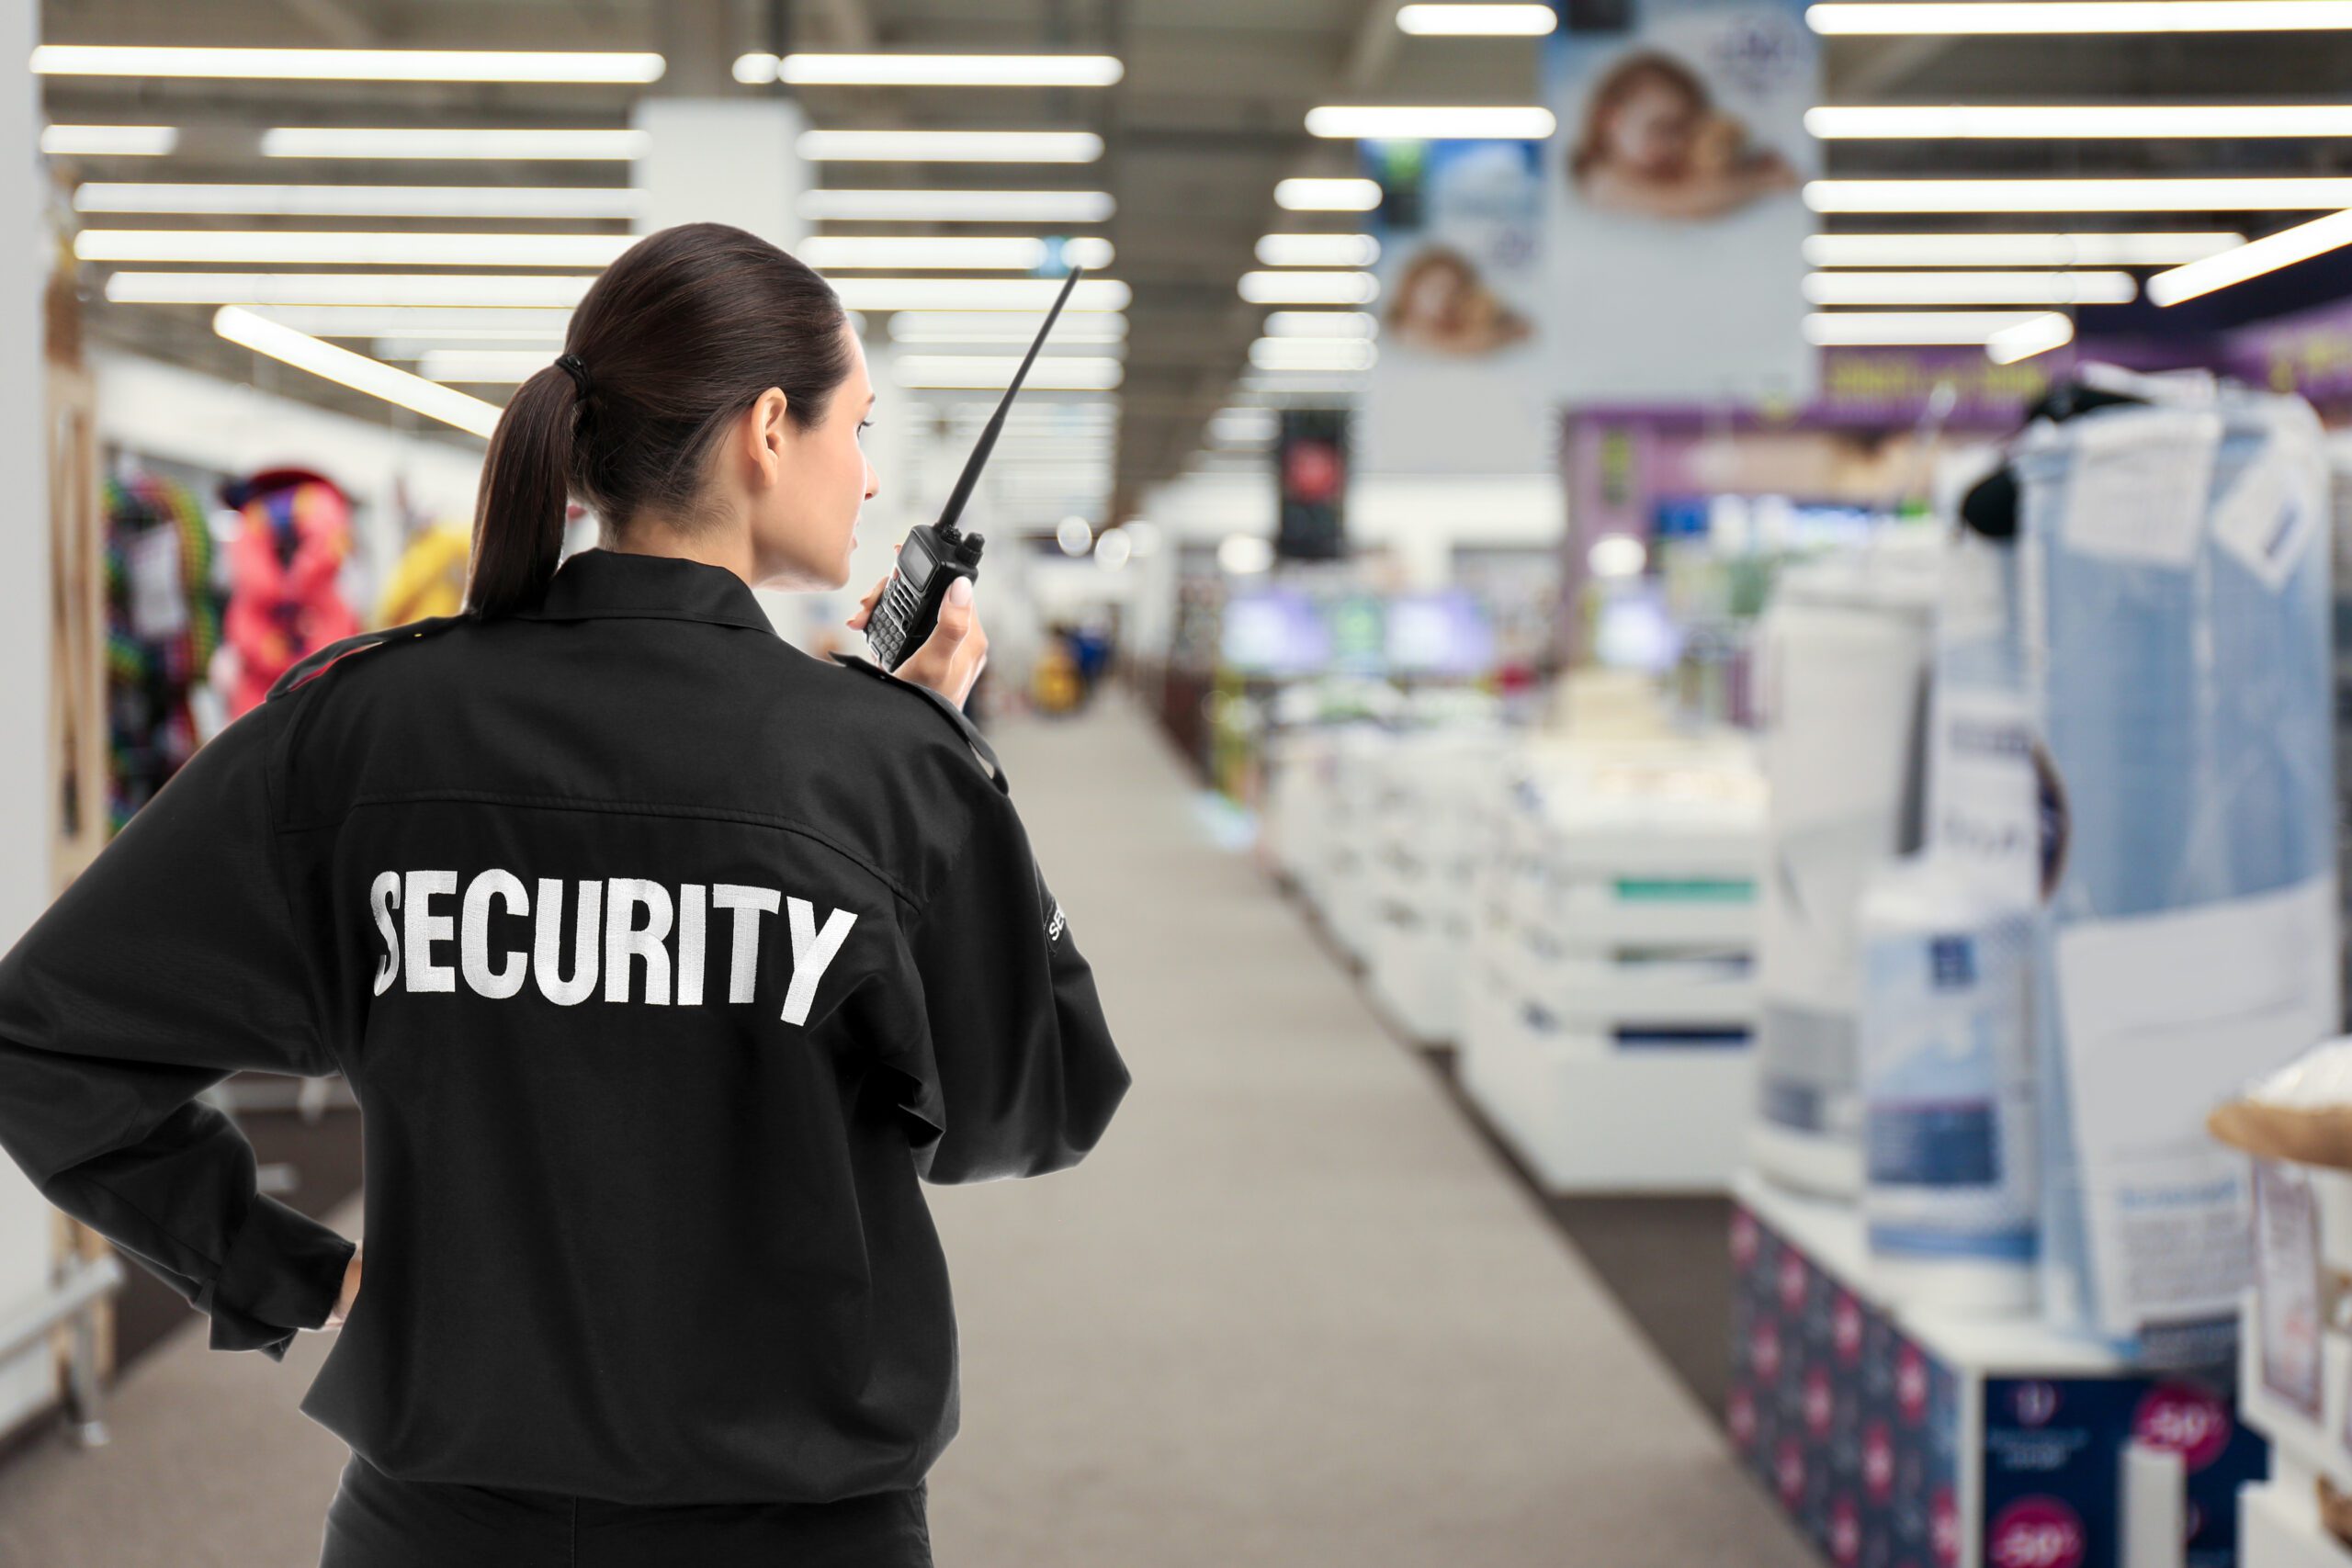 Should retail security be plainclothes or uniformed?